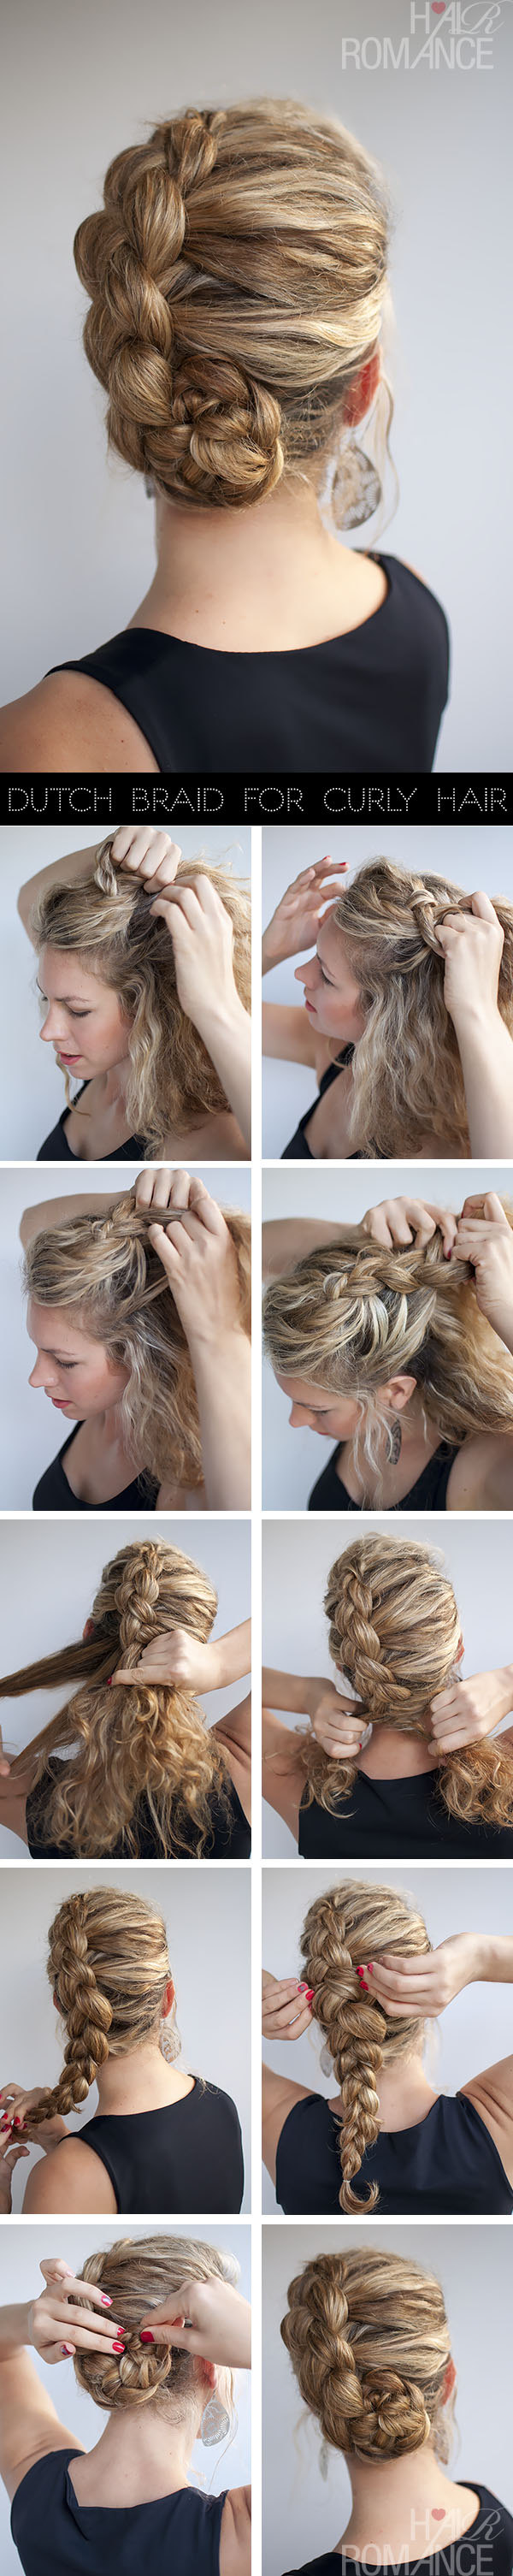 20 Beautiful Hairstyles for Long Hair Step by Step Pictures - Snappy Pixels